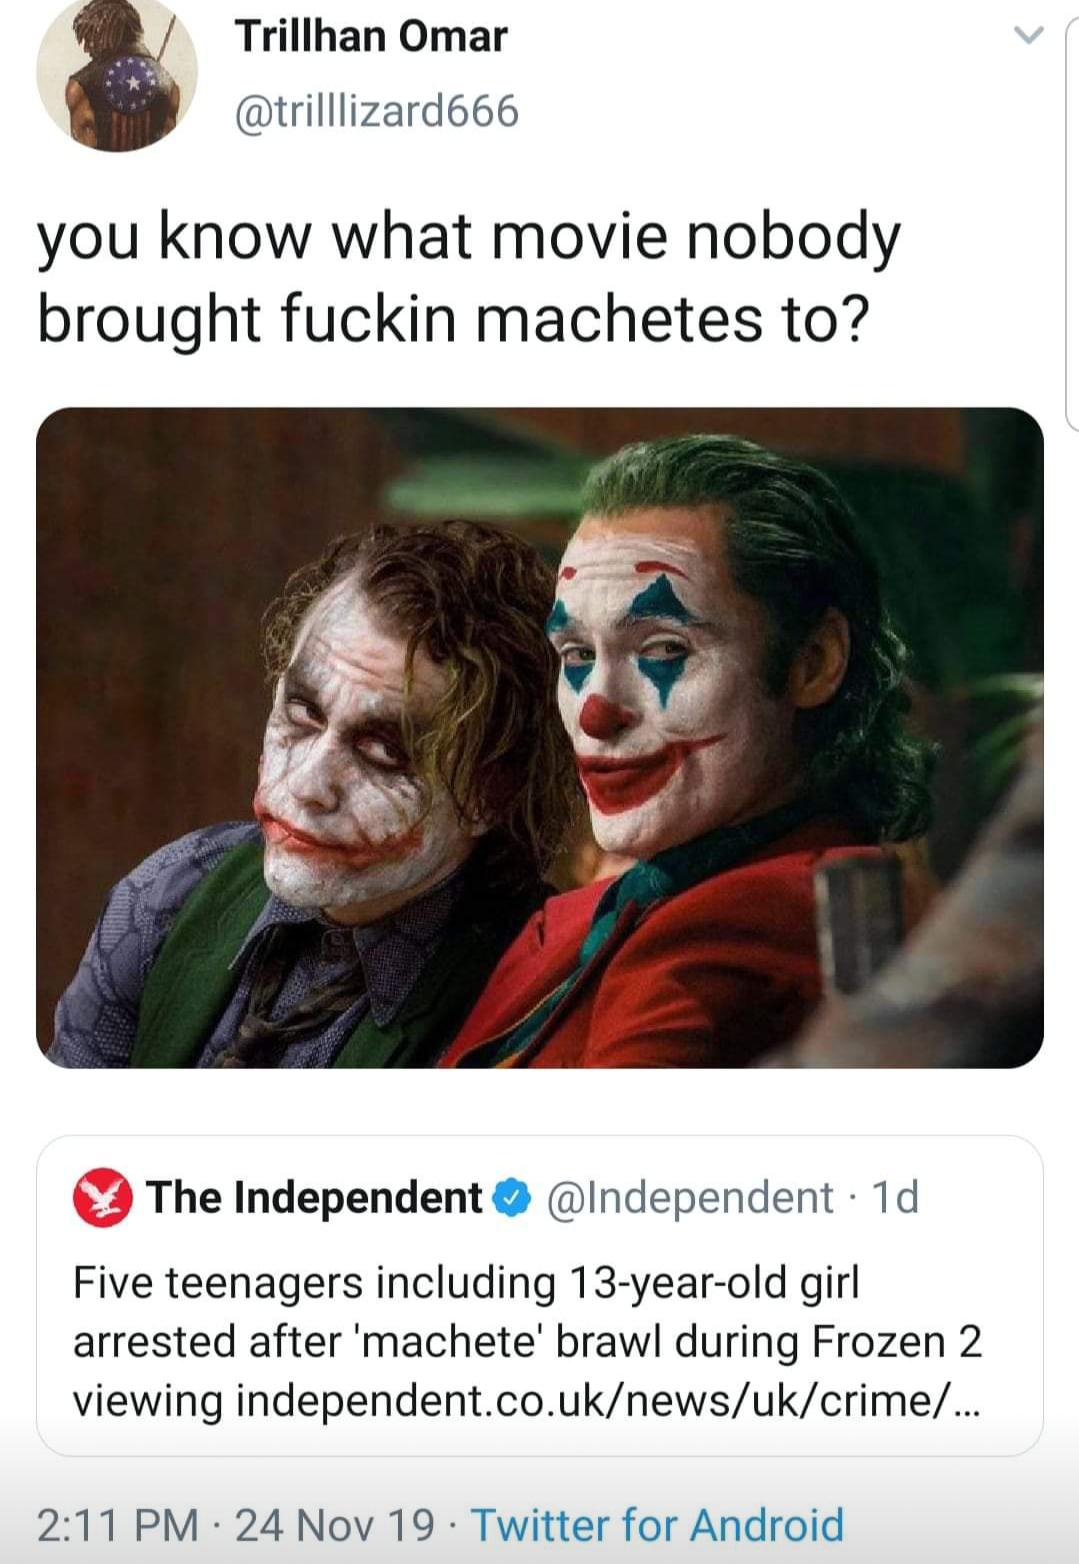 joker - Trillhan Omar you know what movie nobody brought fuckin machetes to? The Independent 1d Five teenagers including 13yearold girl arrested after 'machete' brawl during Frozen 2 viewing independent.co.uknewsukcrime ... 24 Nov 19. Twitter for Android